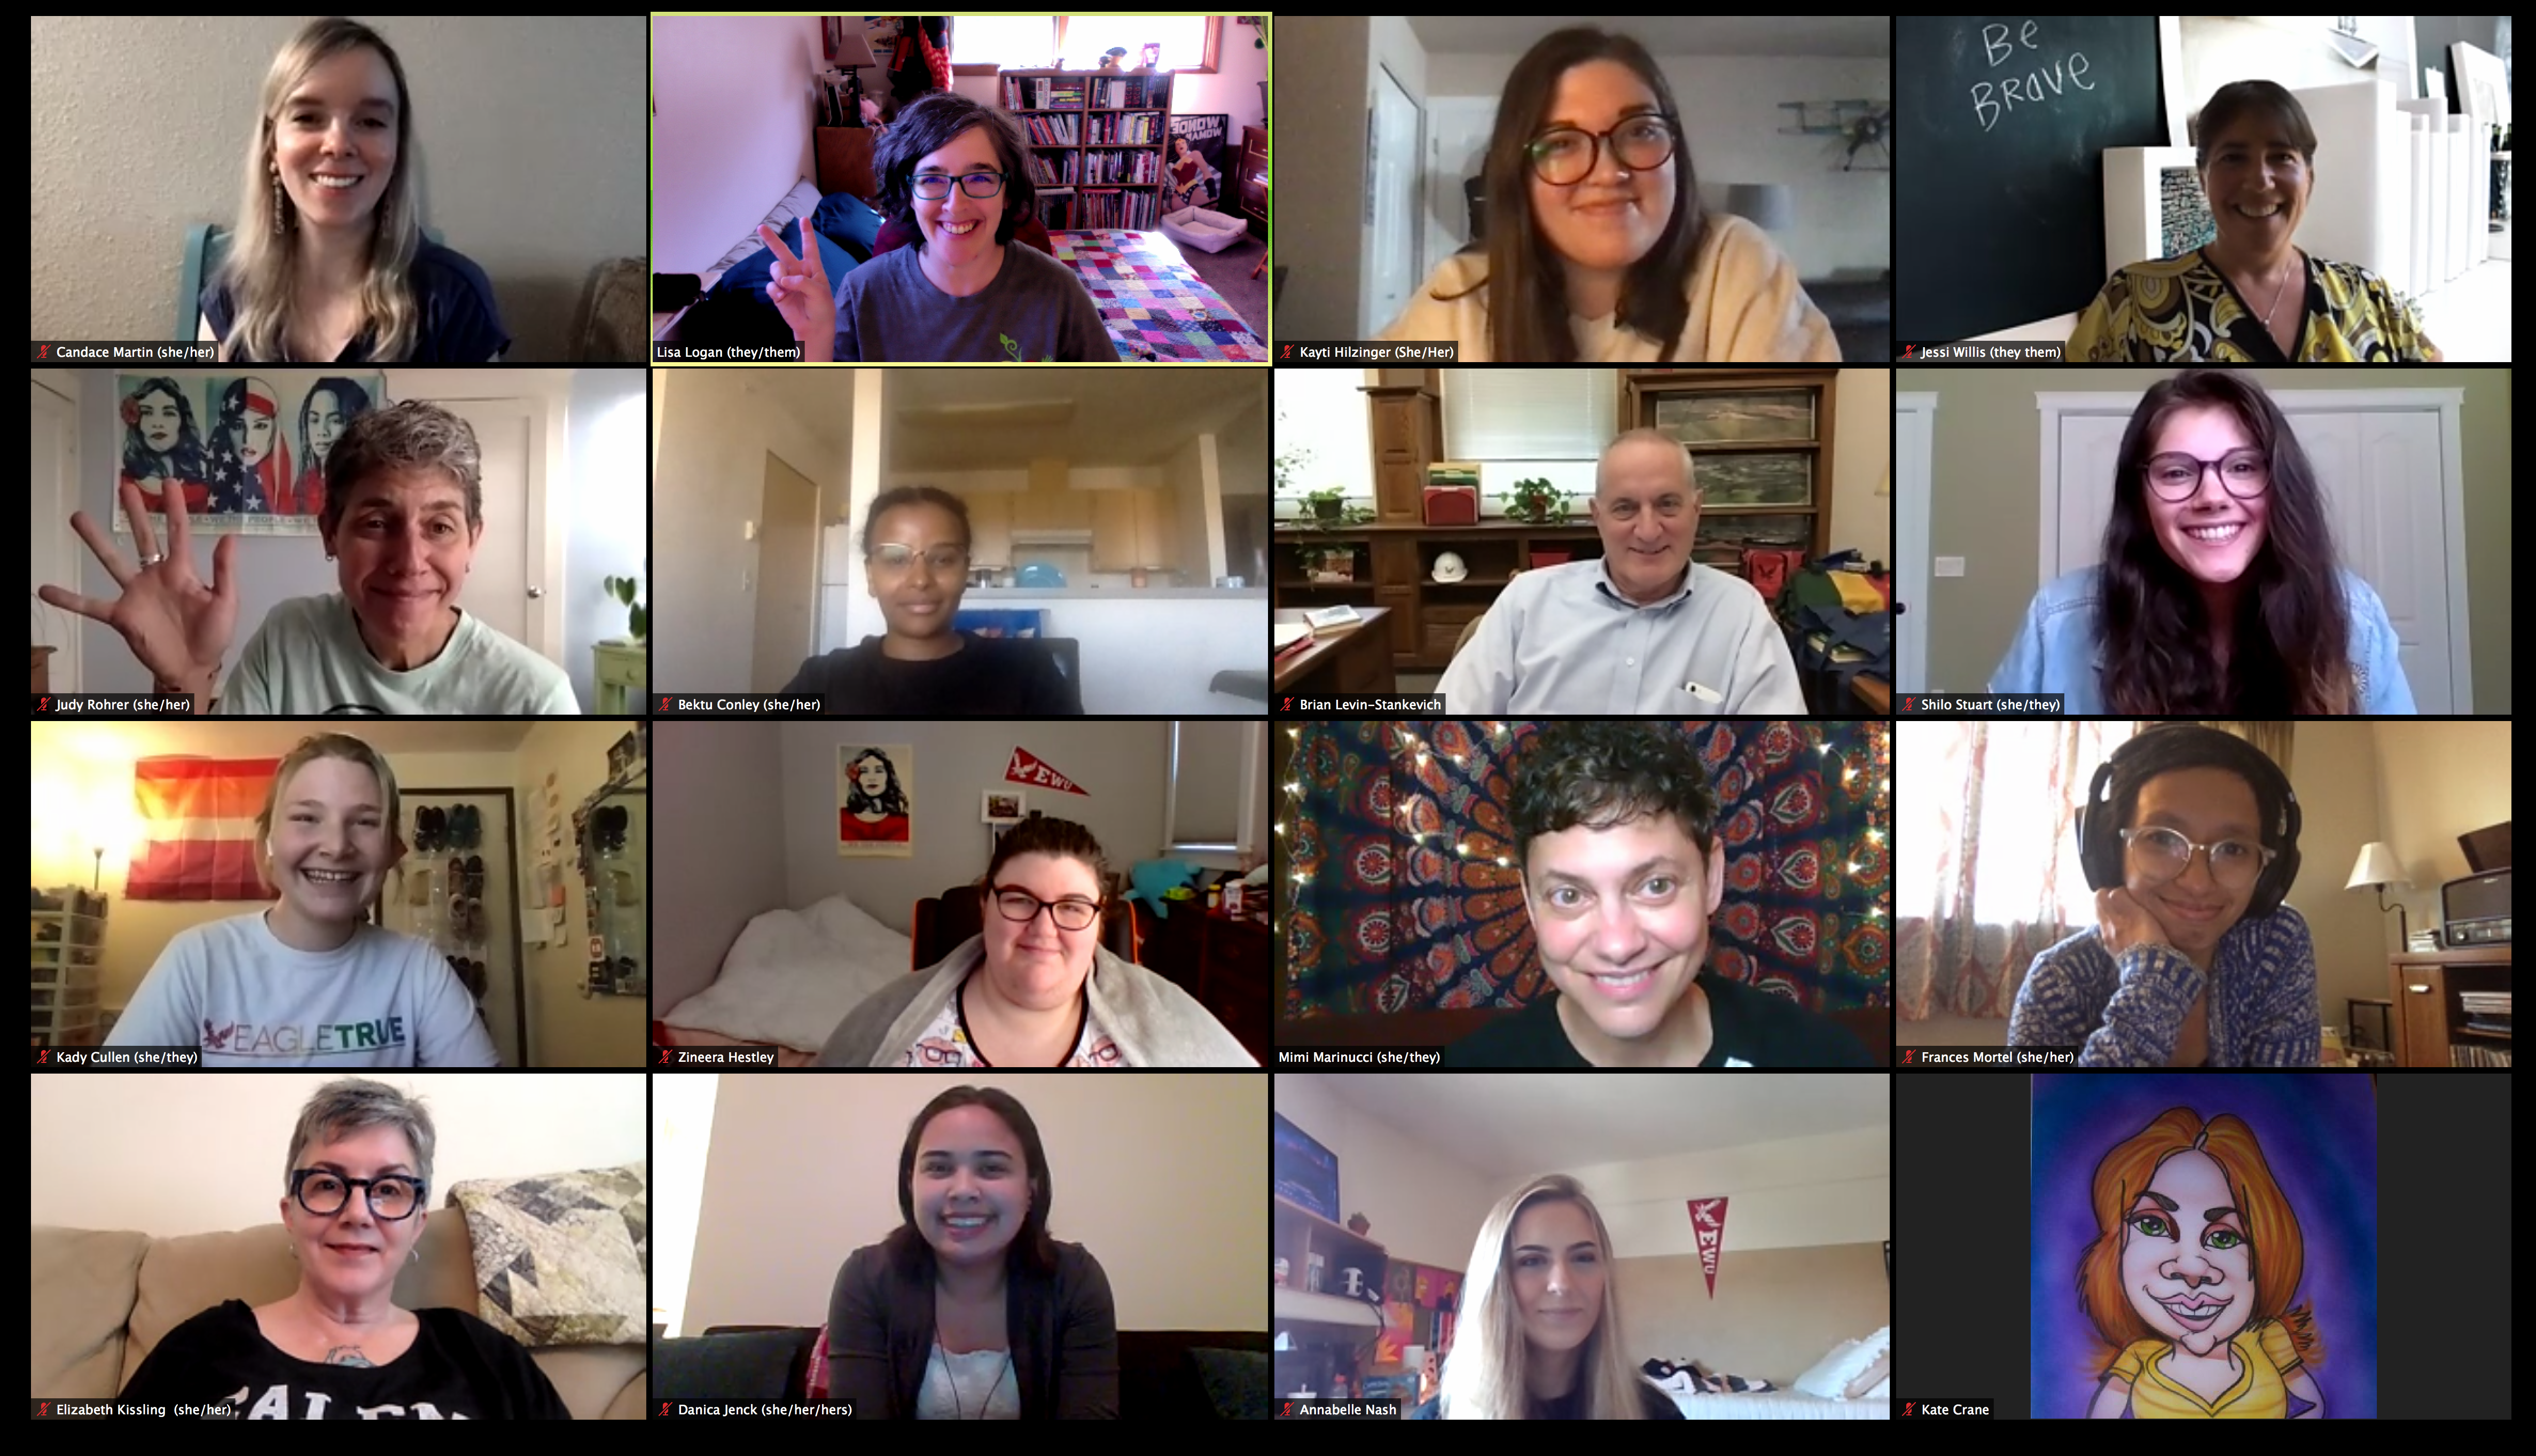 A screenshot of a Zoom meeting with 16 people smiling.